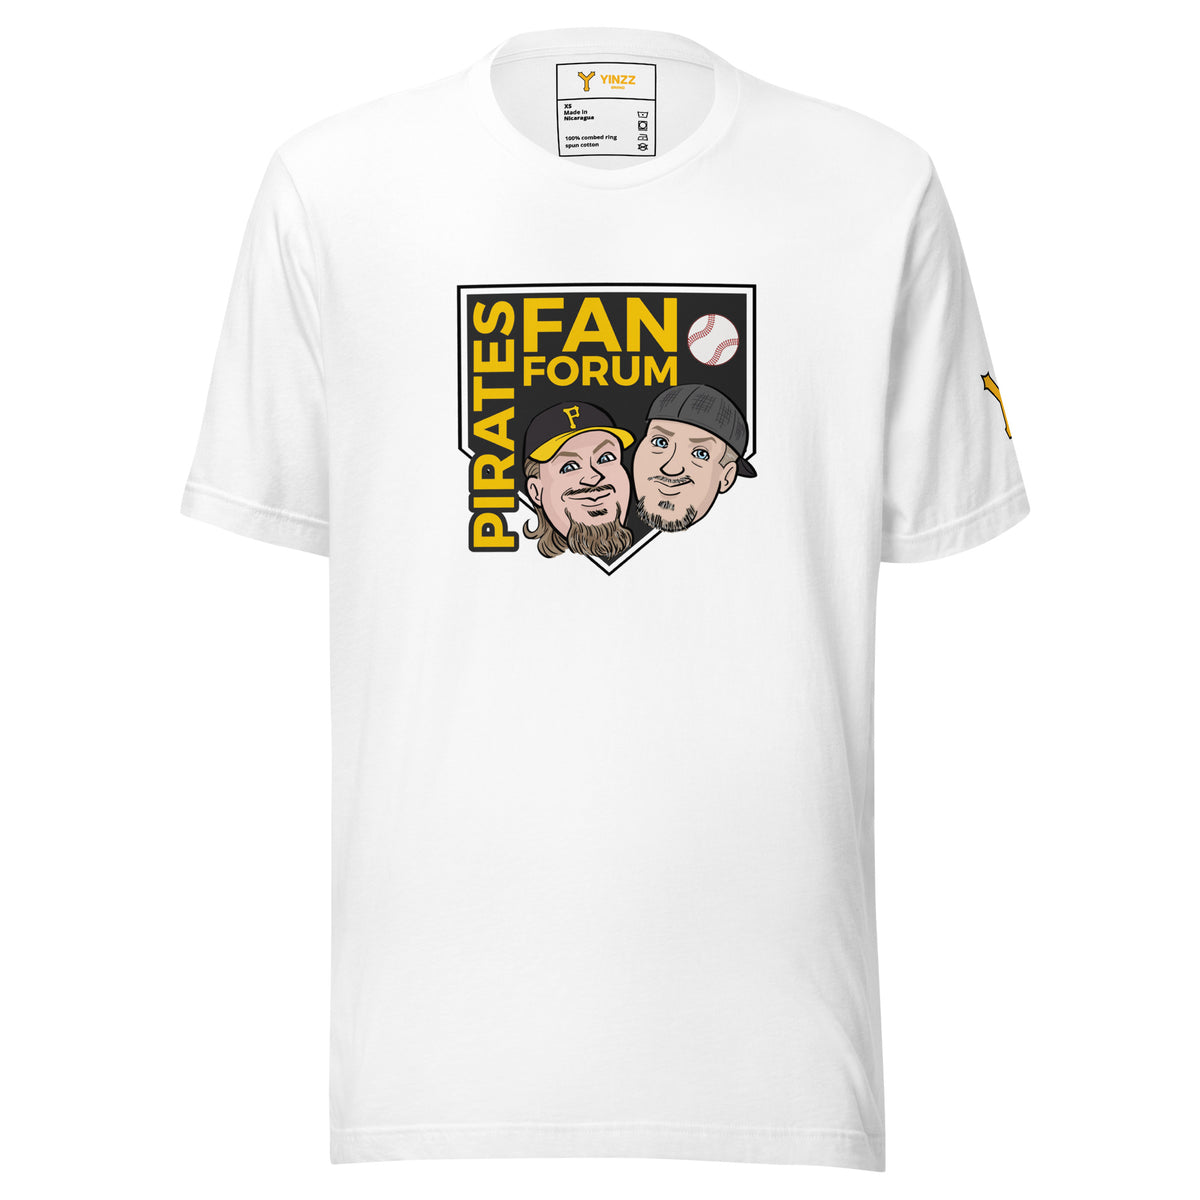 The Official Tee of Pirates Fan Forum | YINZZ